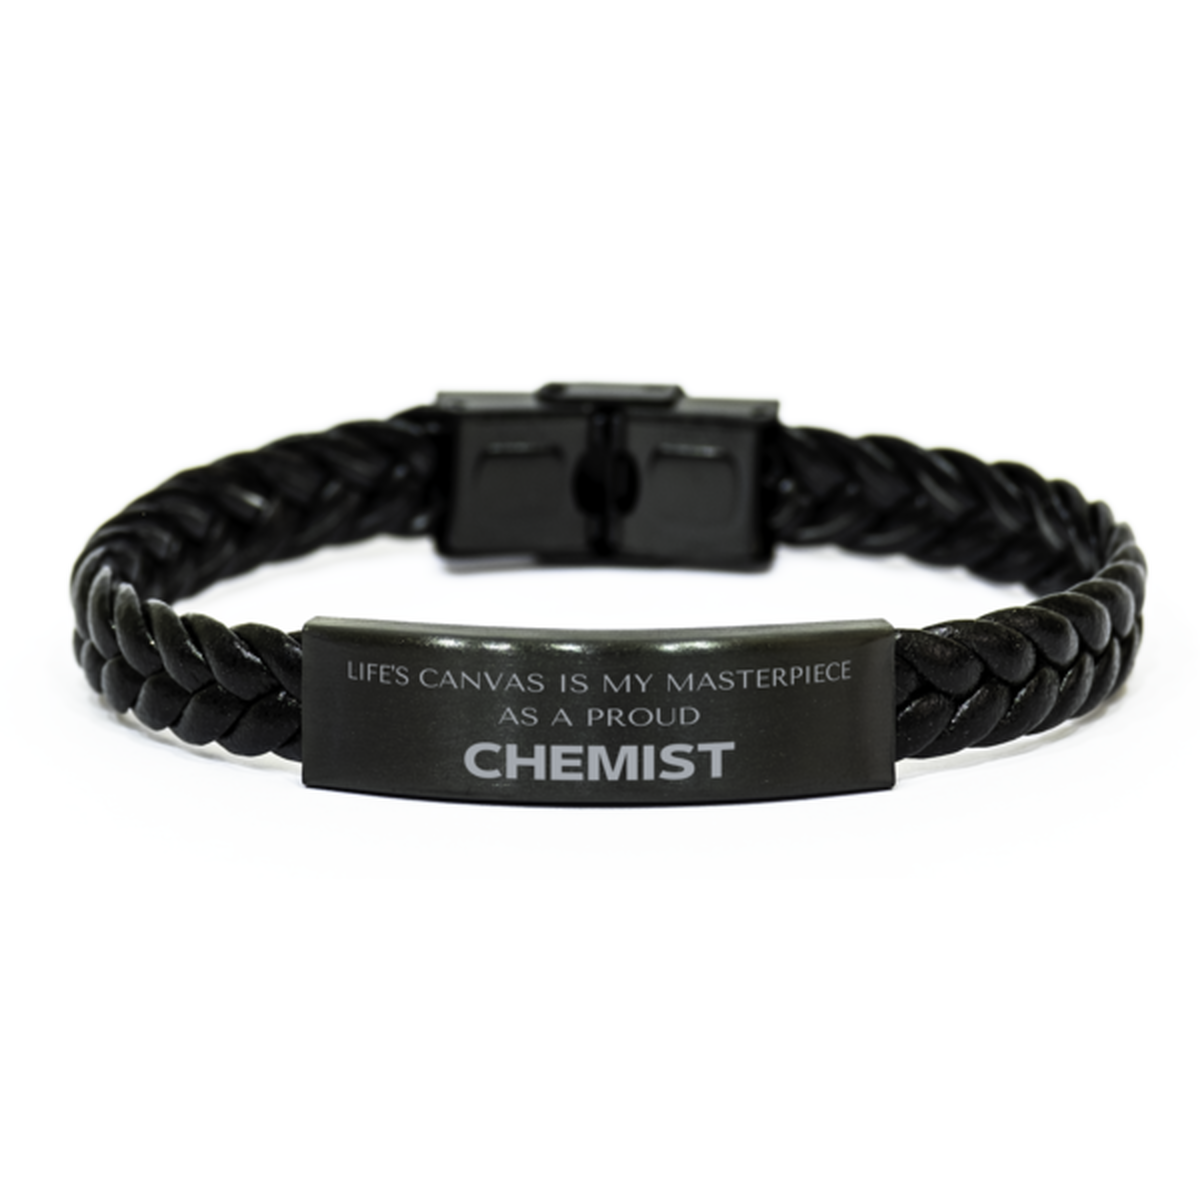 Proud Chemist Gifts, Life's canvas is my masterpiece, Epic Birthday Christmas Unique Braided Leather Bracelet For Chemist, Coworkers, Men, Women, Friends